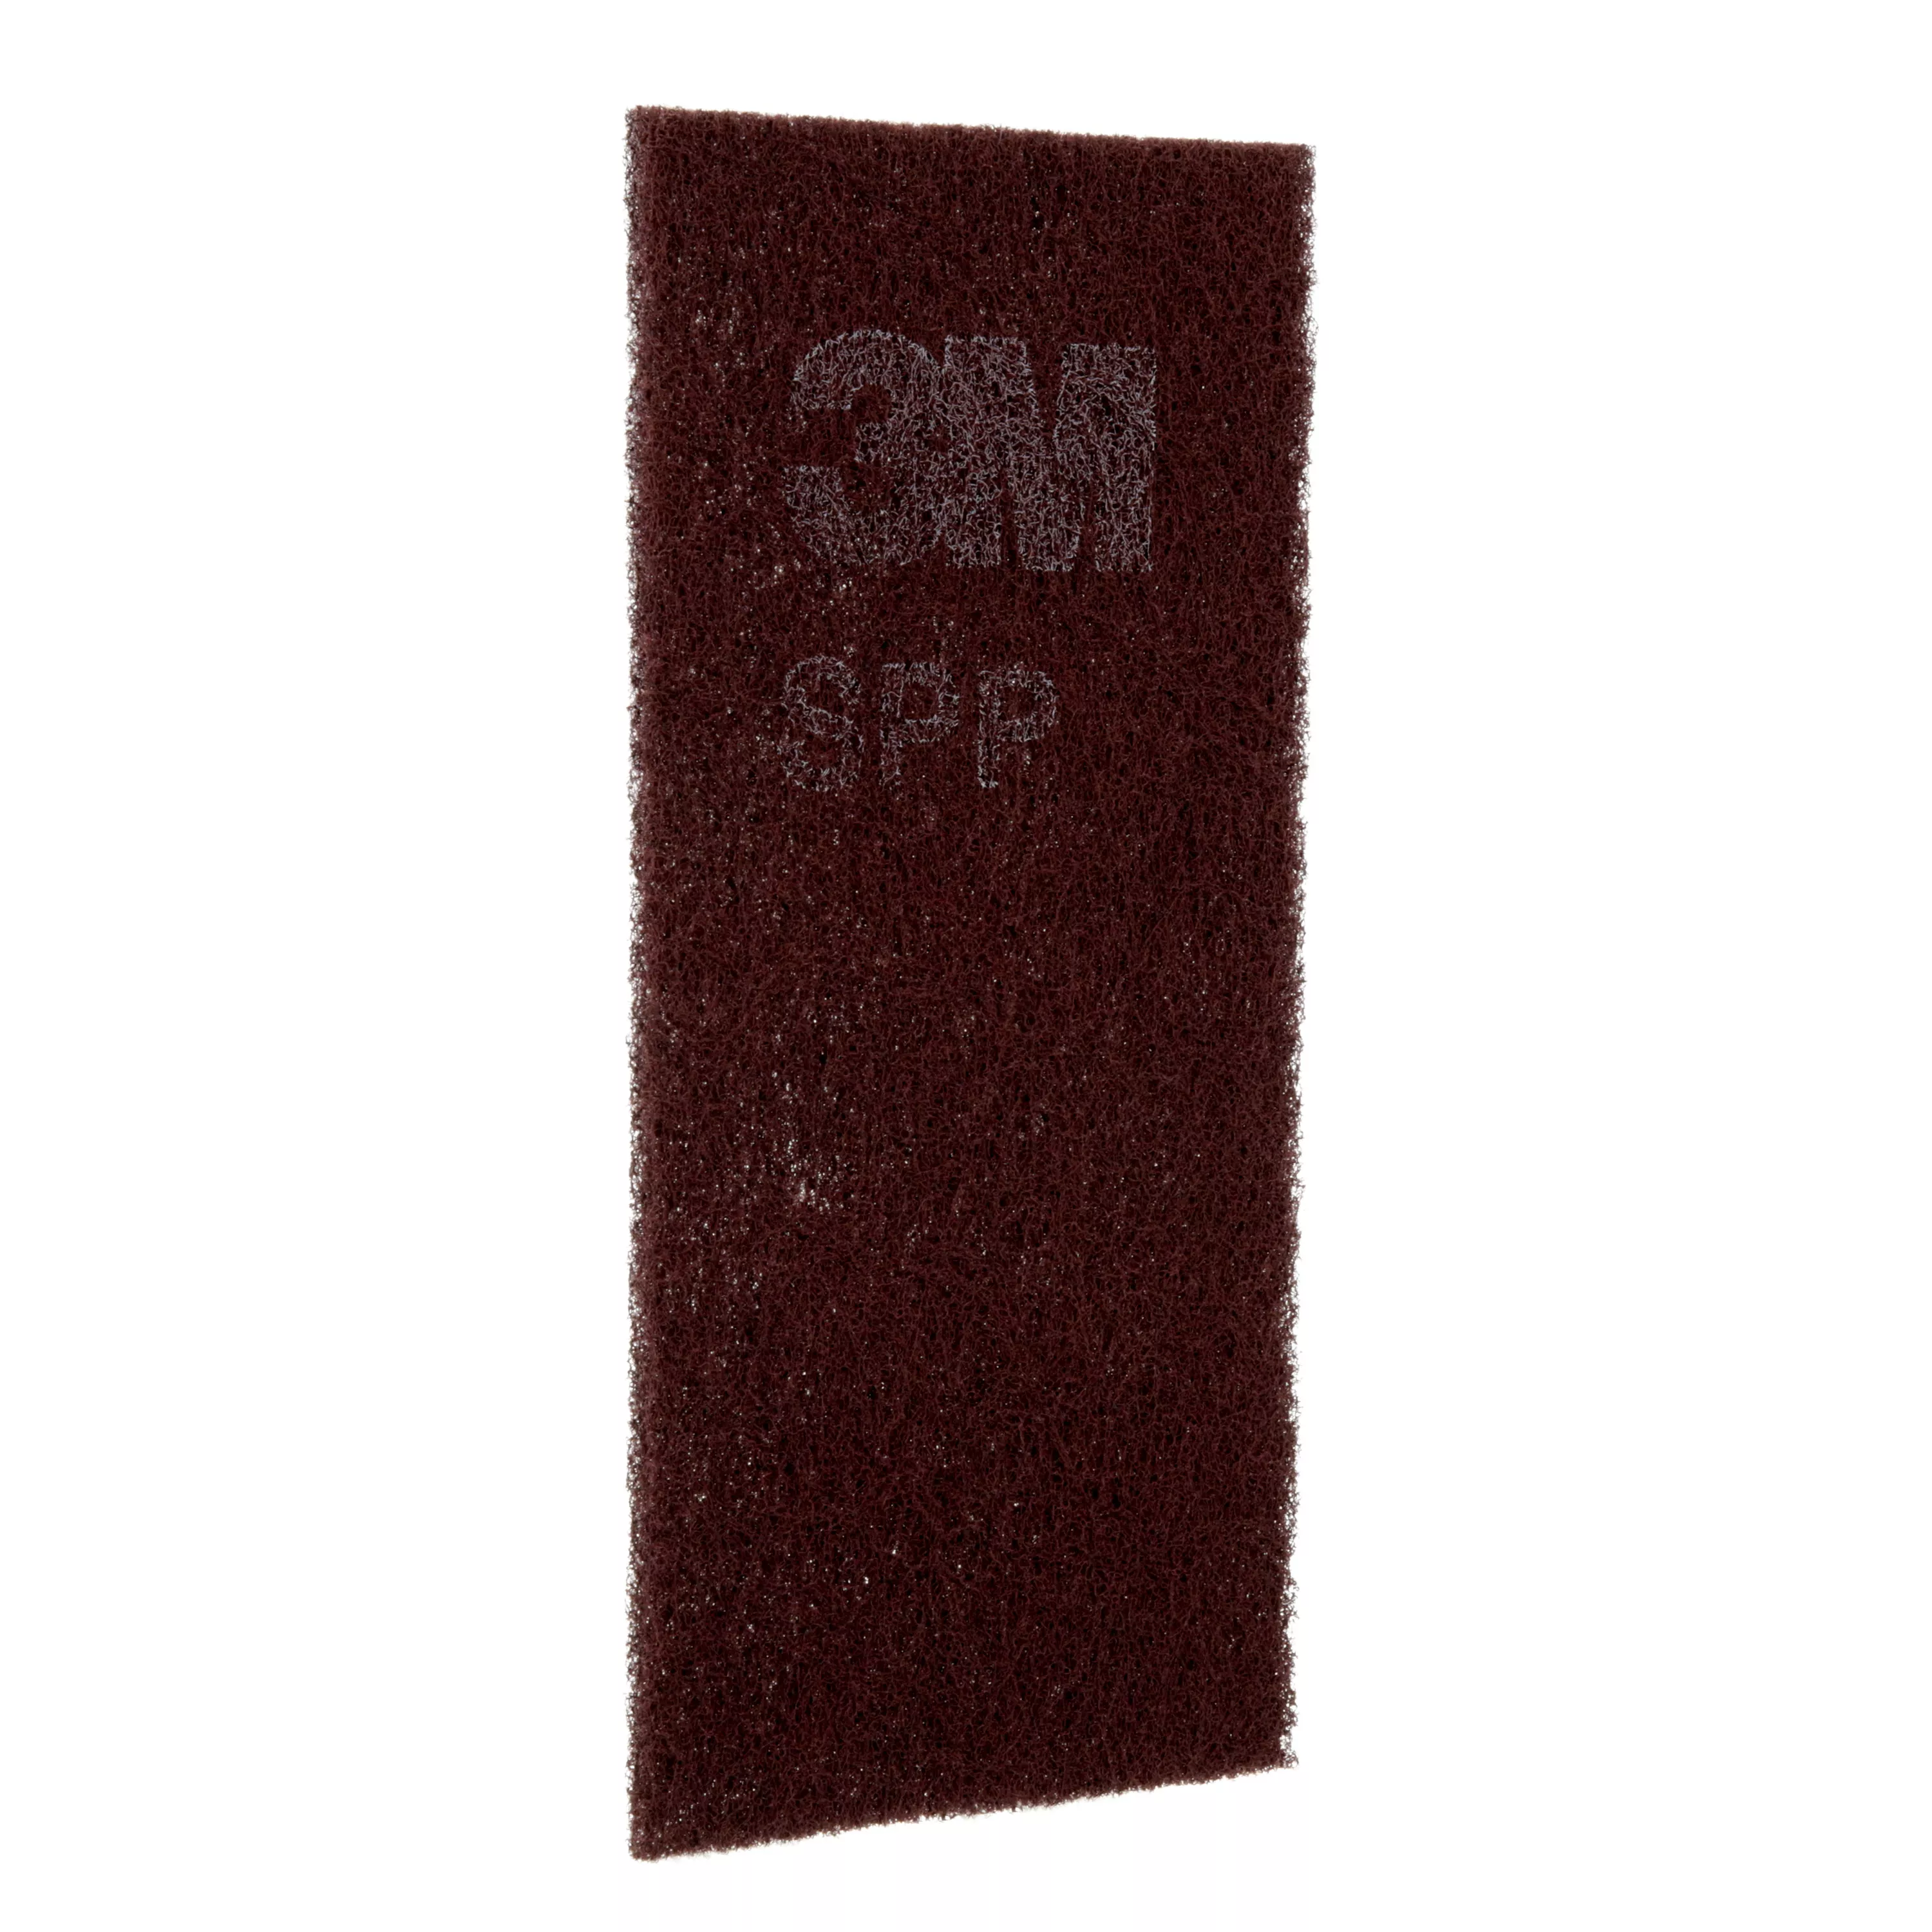 Product Number SPP4-5/8X1 | Scotch-Brite™ Surface Preparation Pads SPP